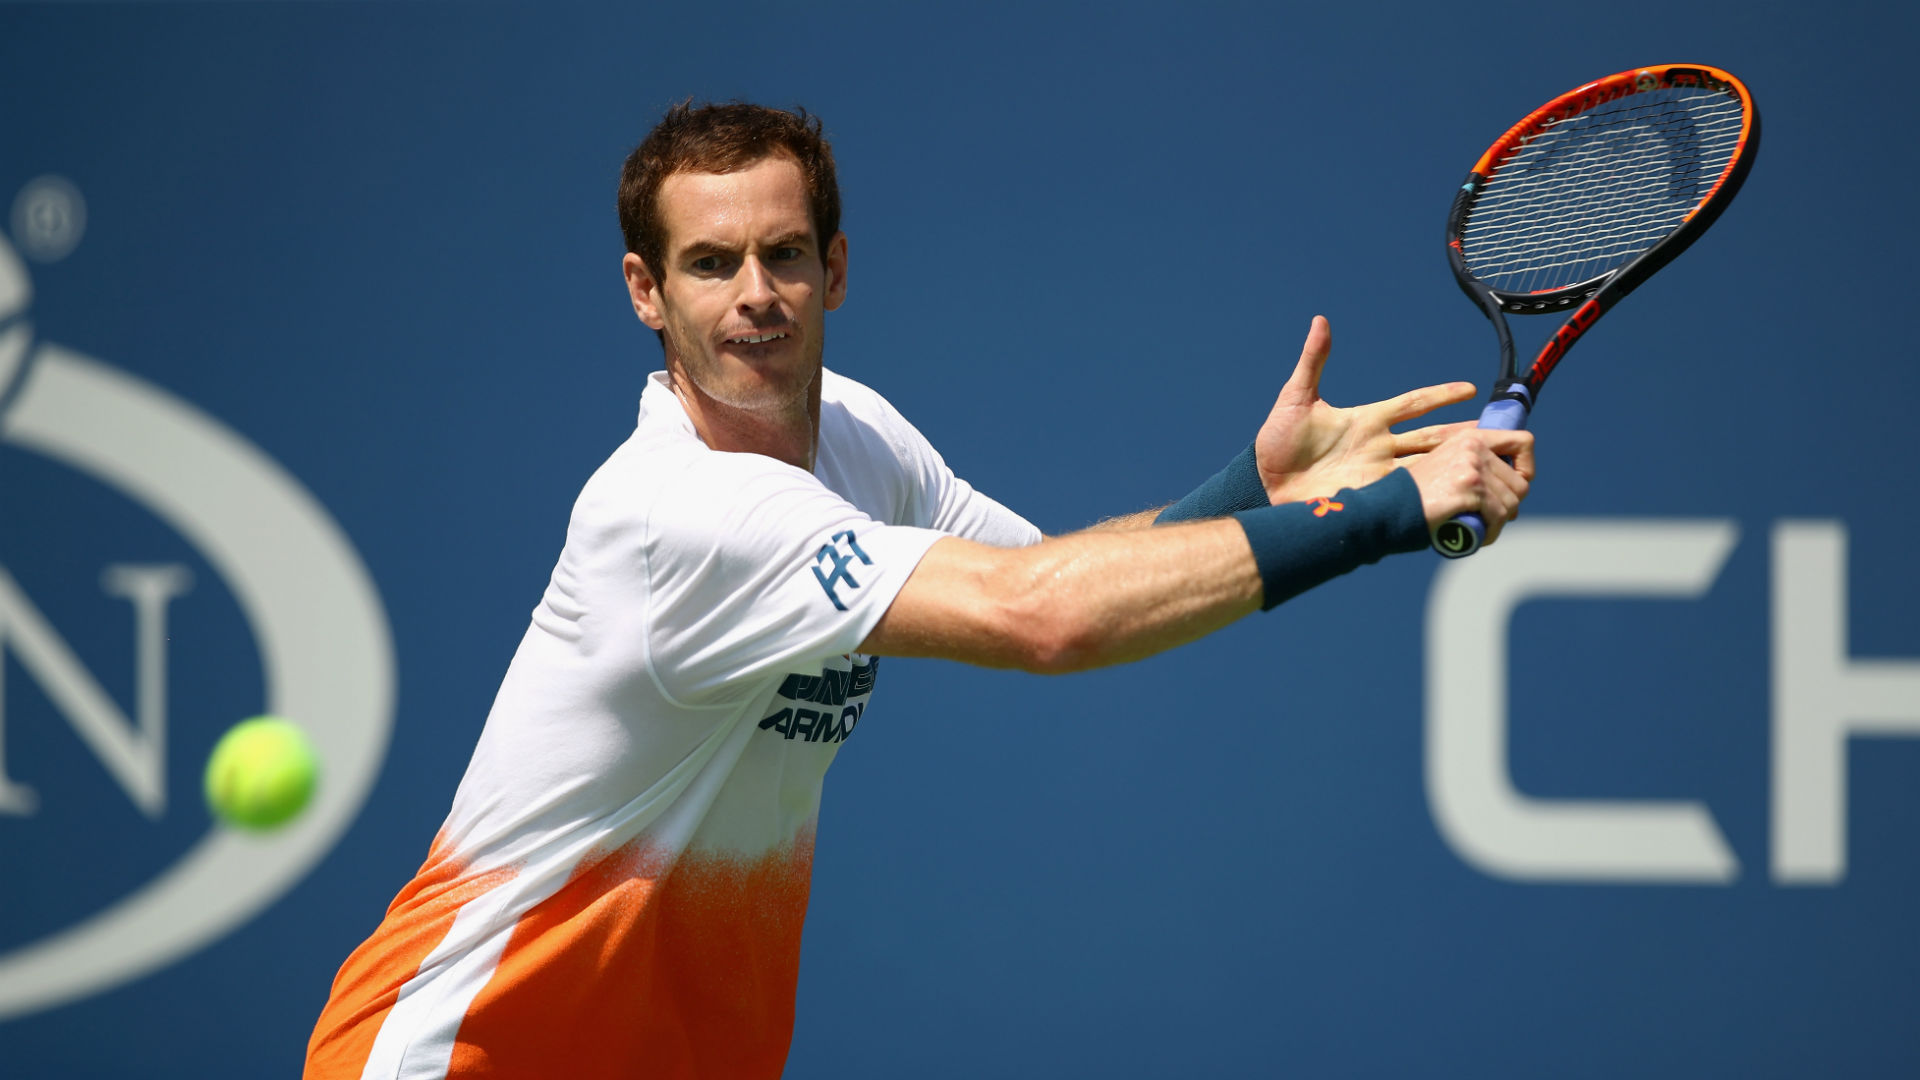 Murray to feature at Australian Open, claims tournament director